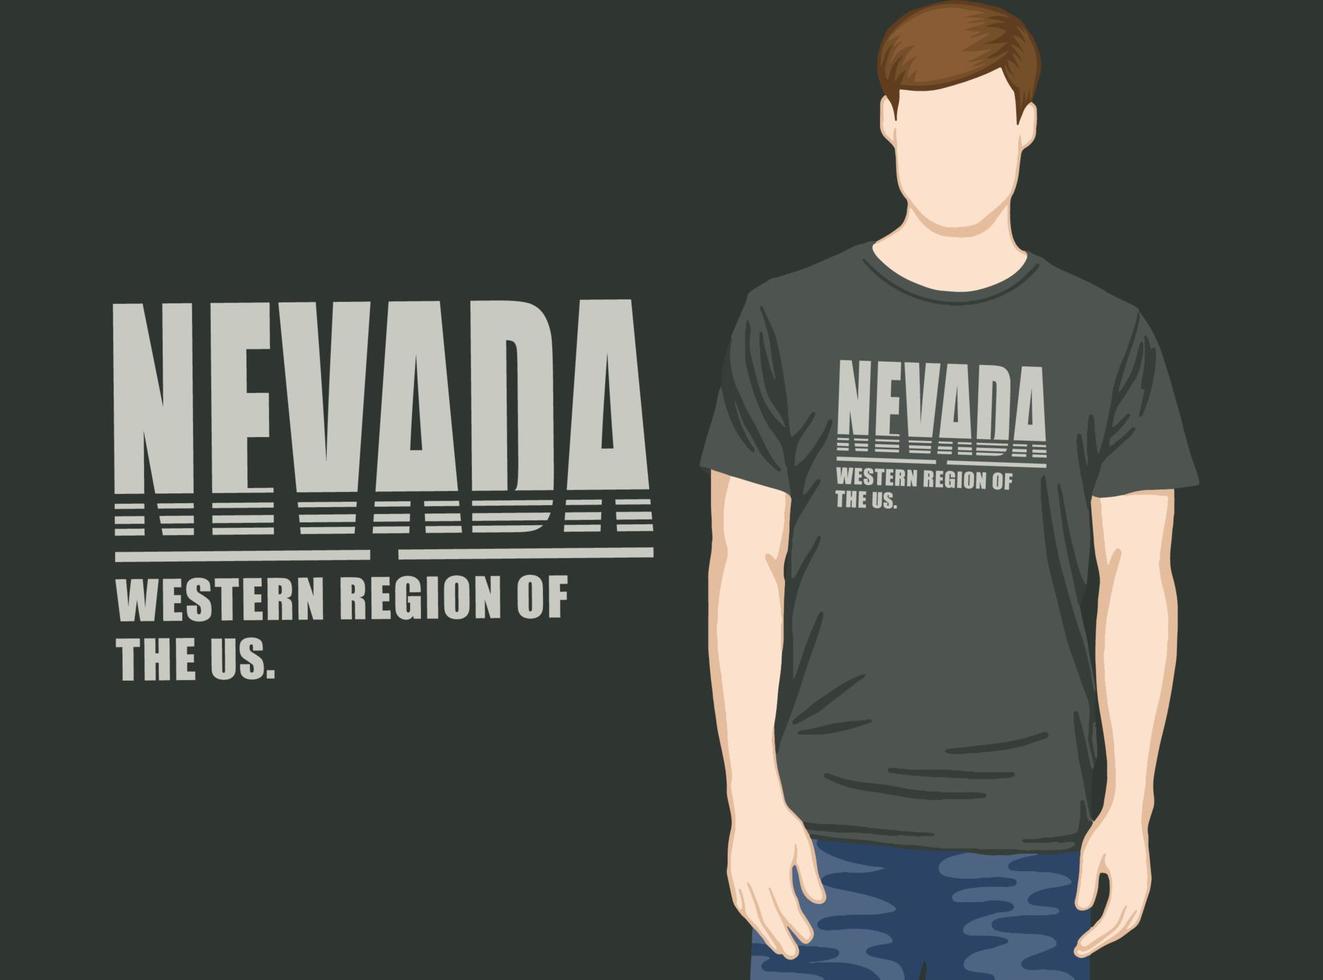 Nevada typography design for t-shirt vector